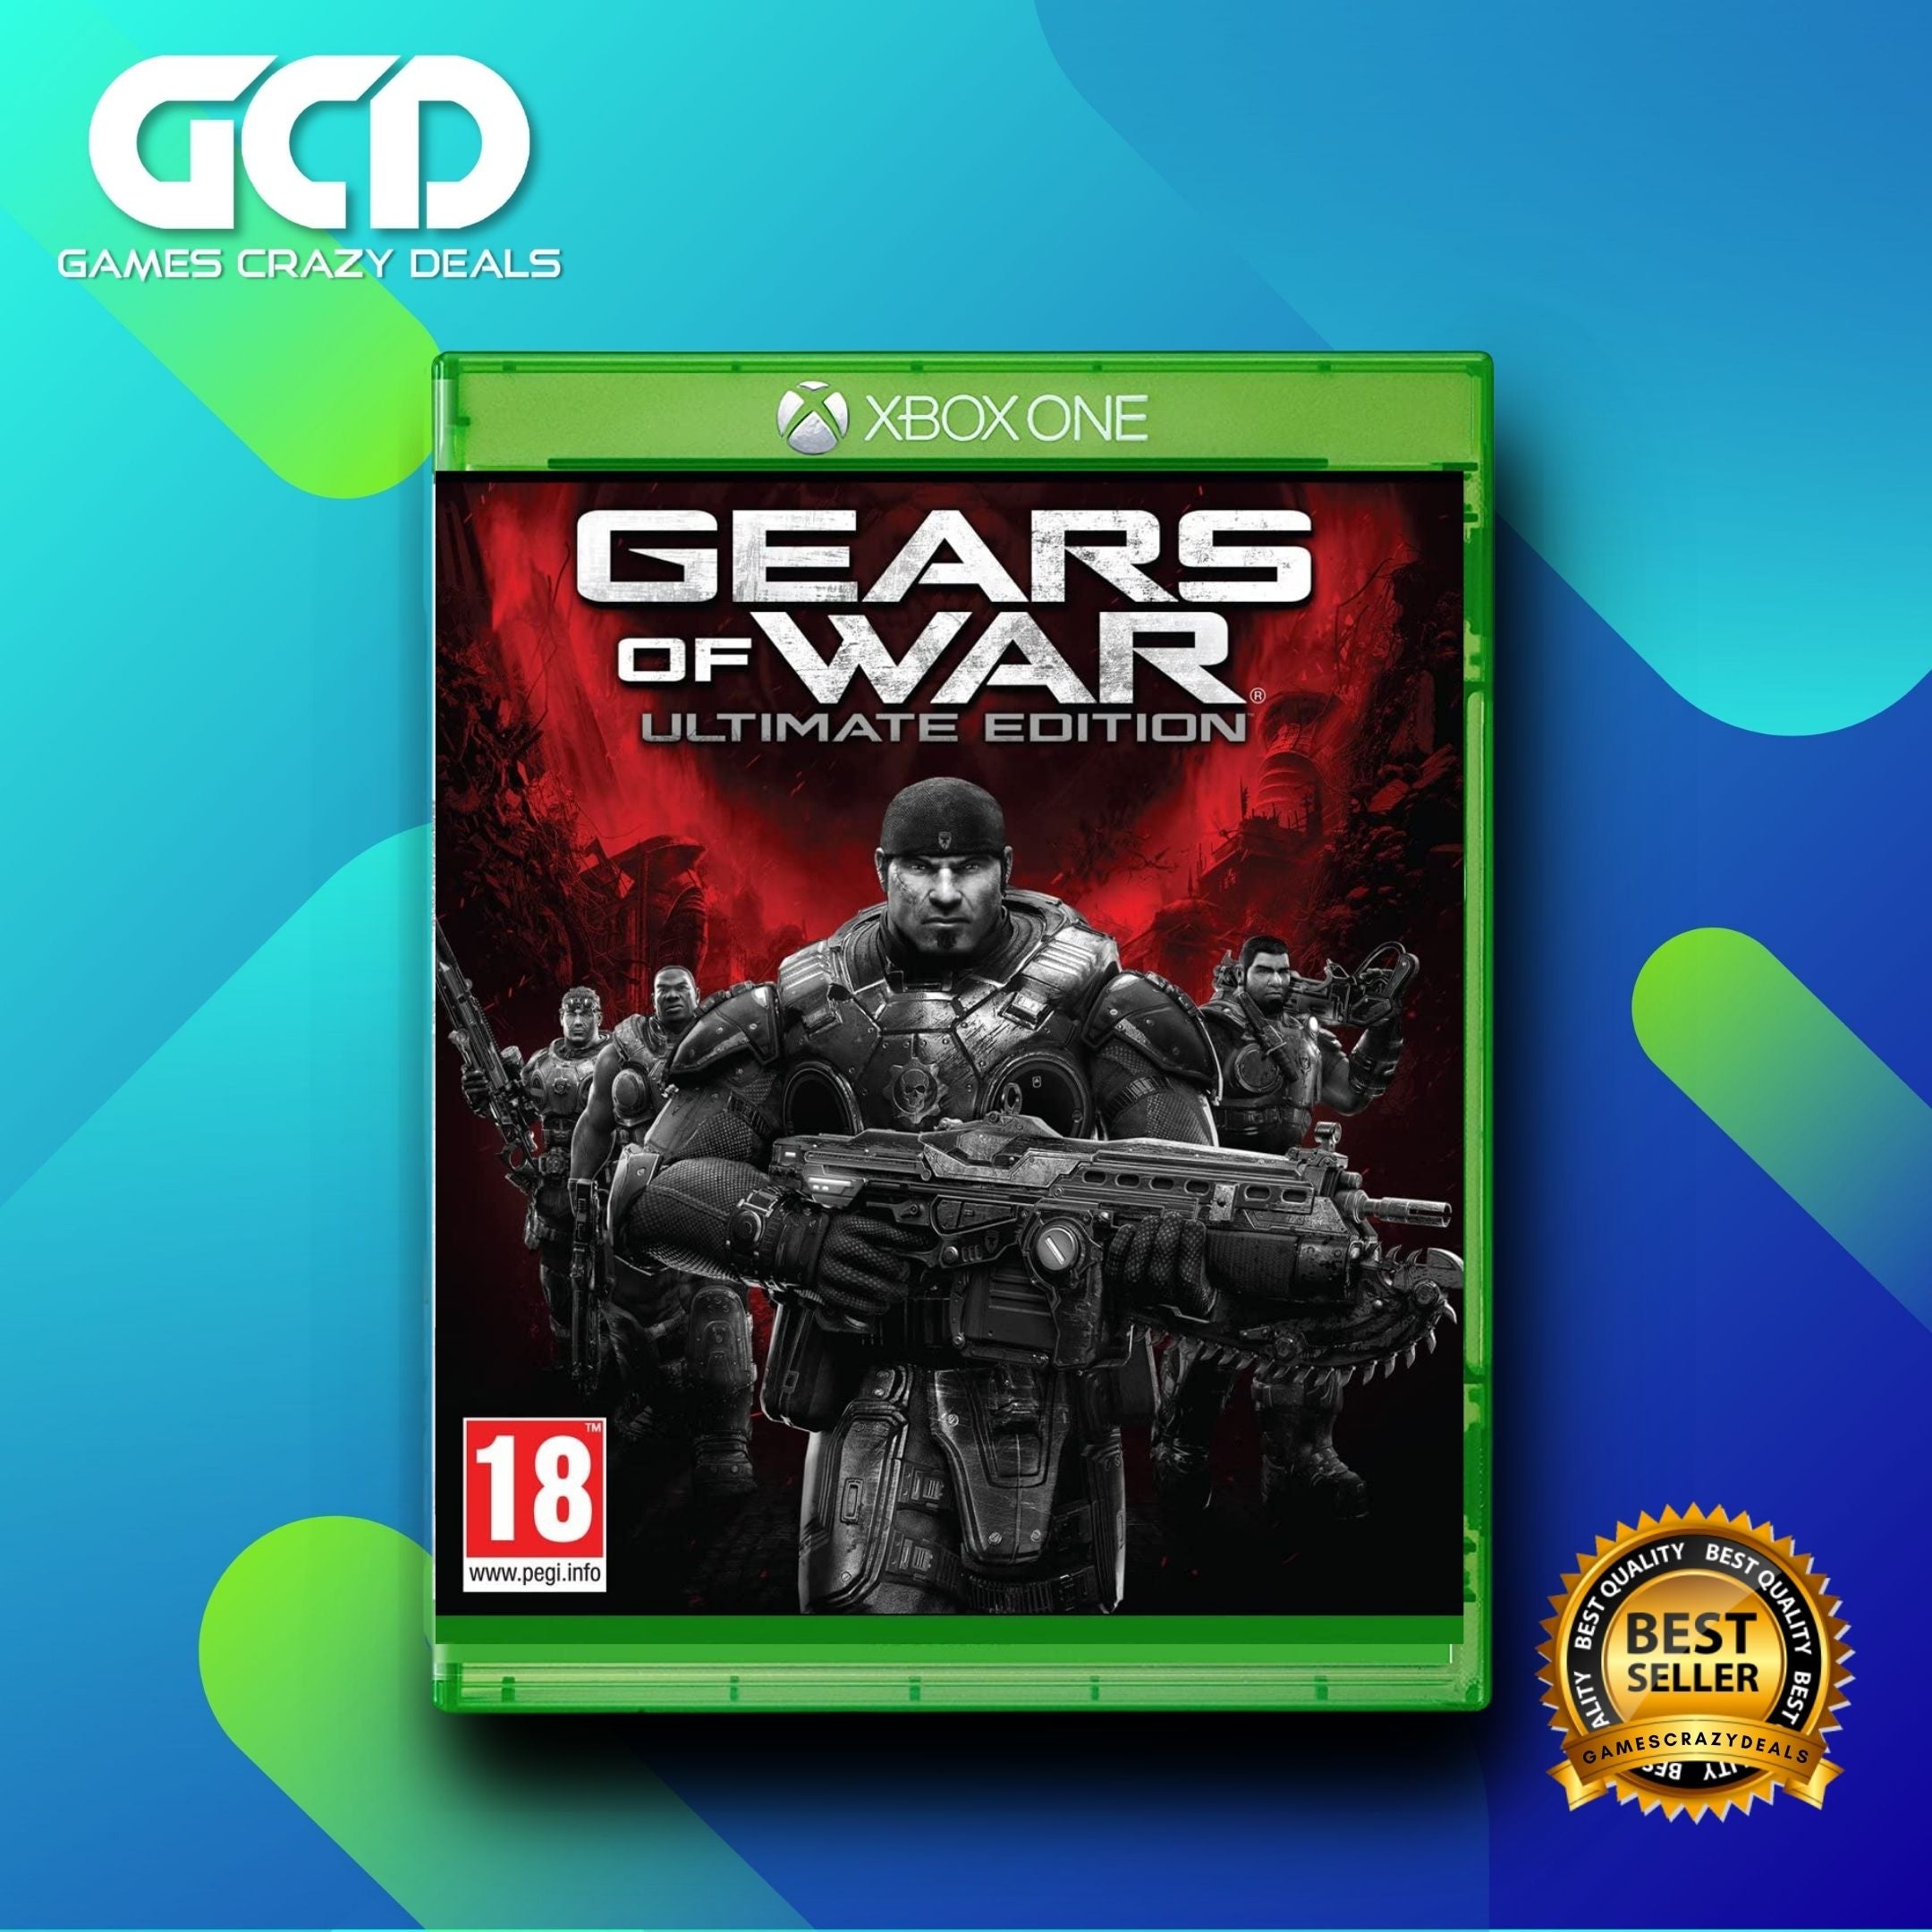 Xbox One Gears of War: Ultimate Edition Bundle and Behind-the